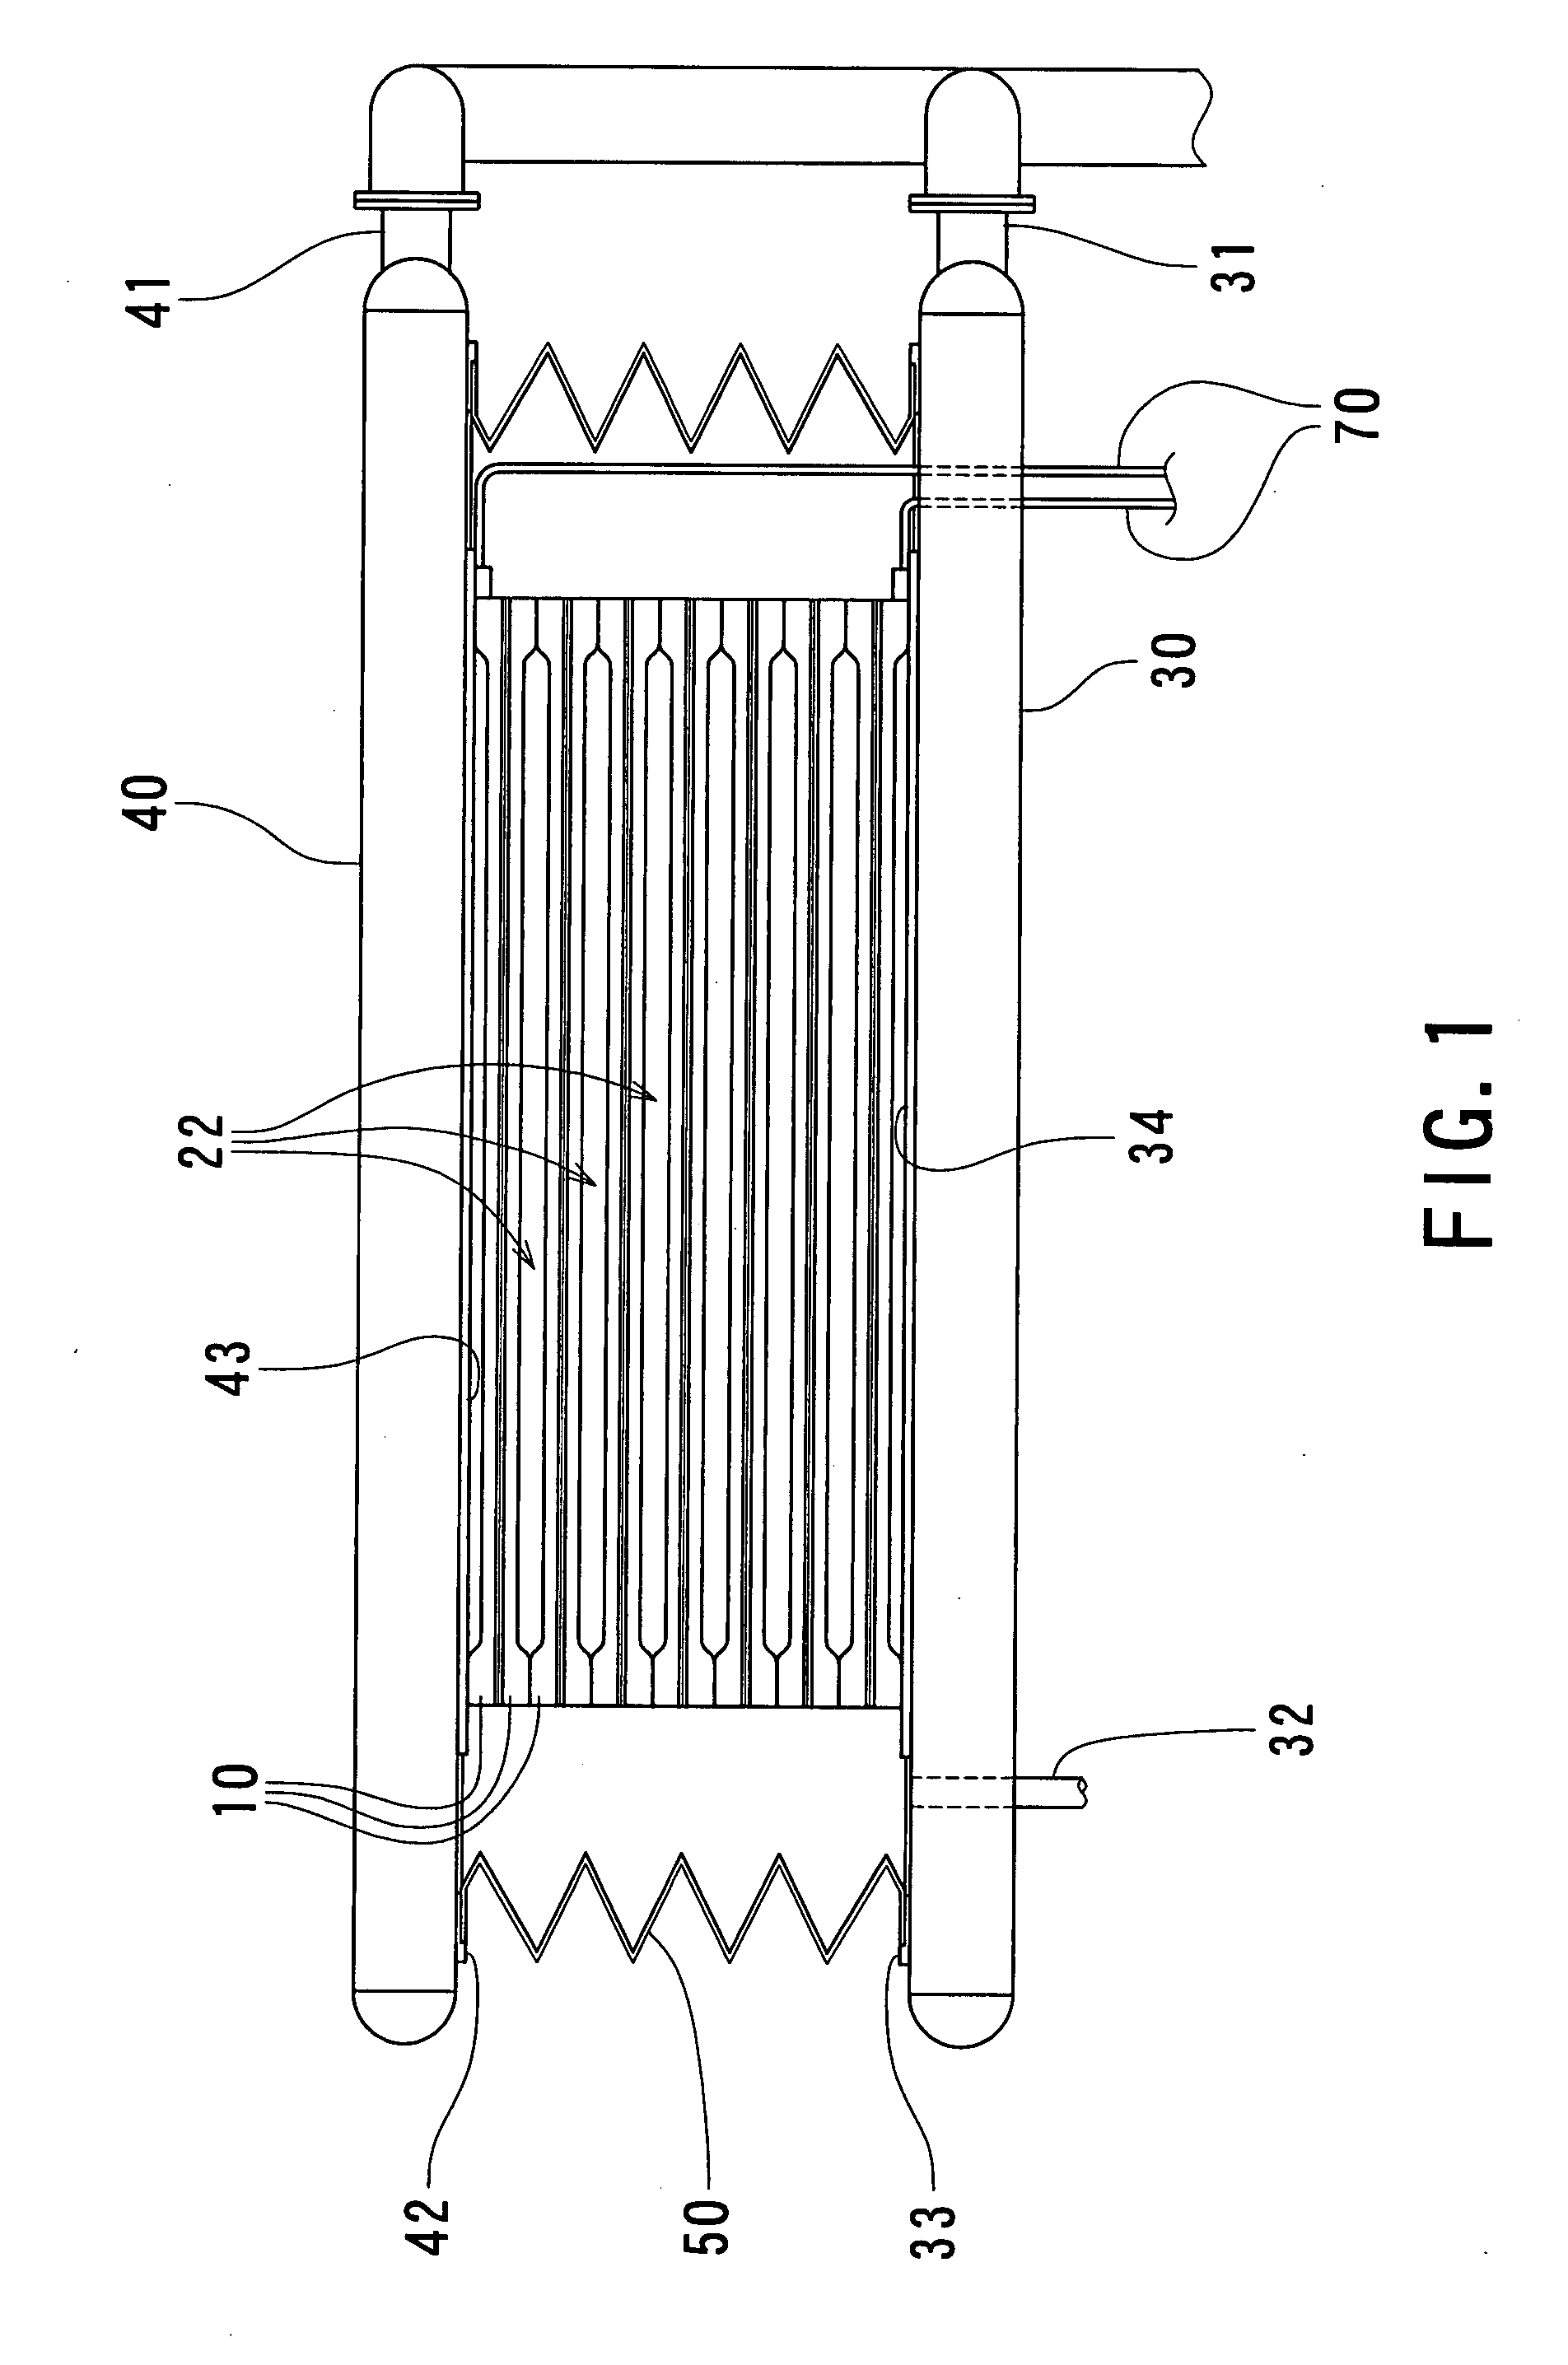 Method for manufacturing a heat exchanger